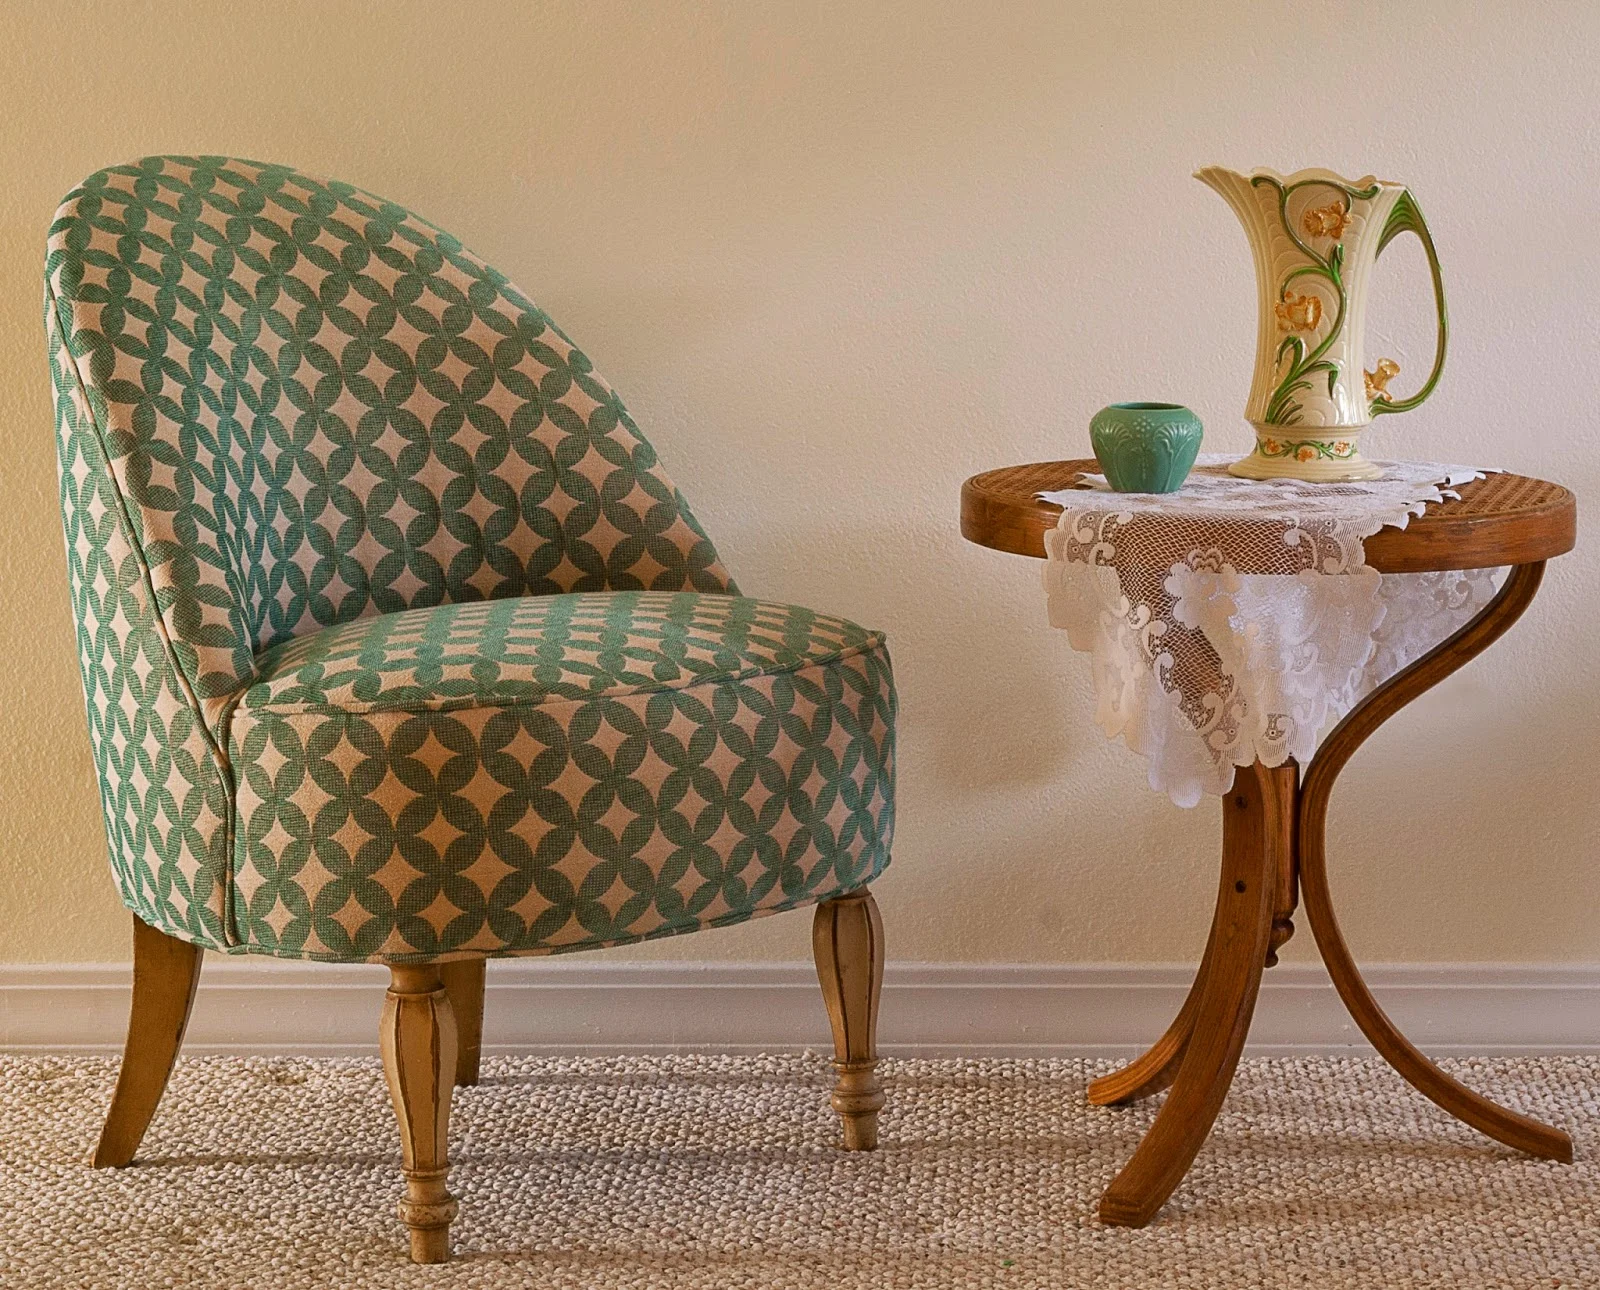 Upholstery makeover of a Goodwill chair, 8 tips for thrift shopping